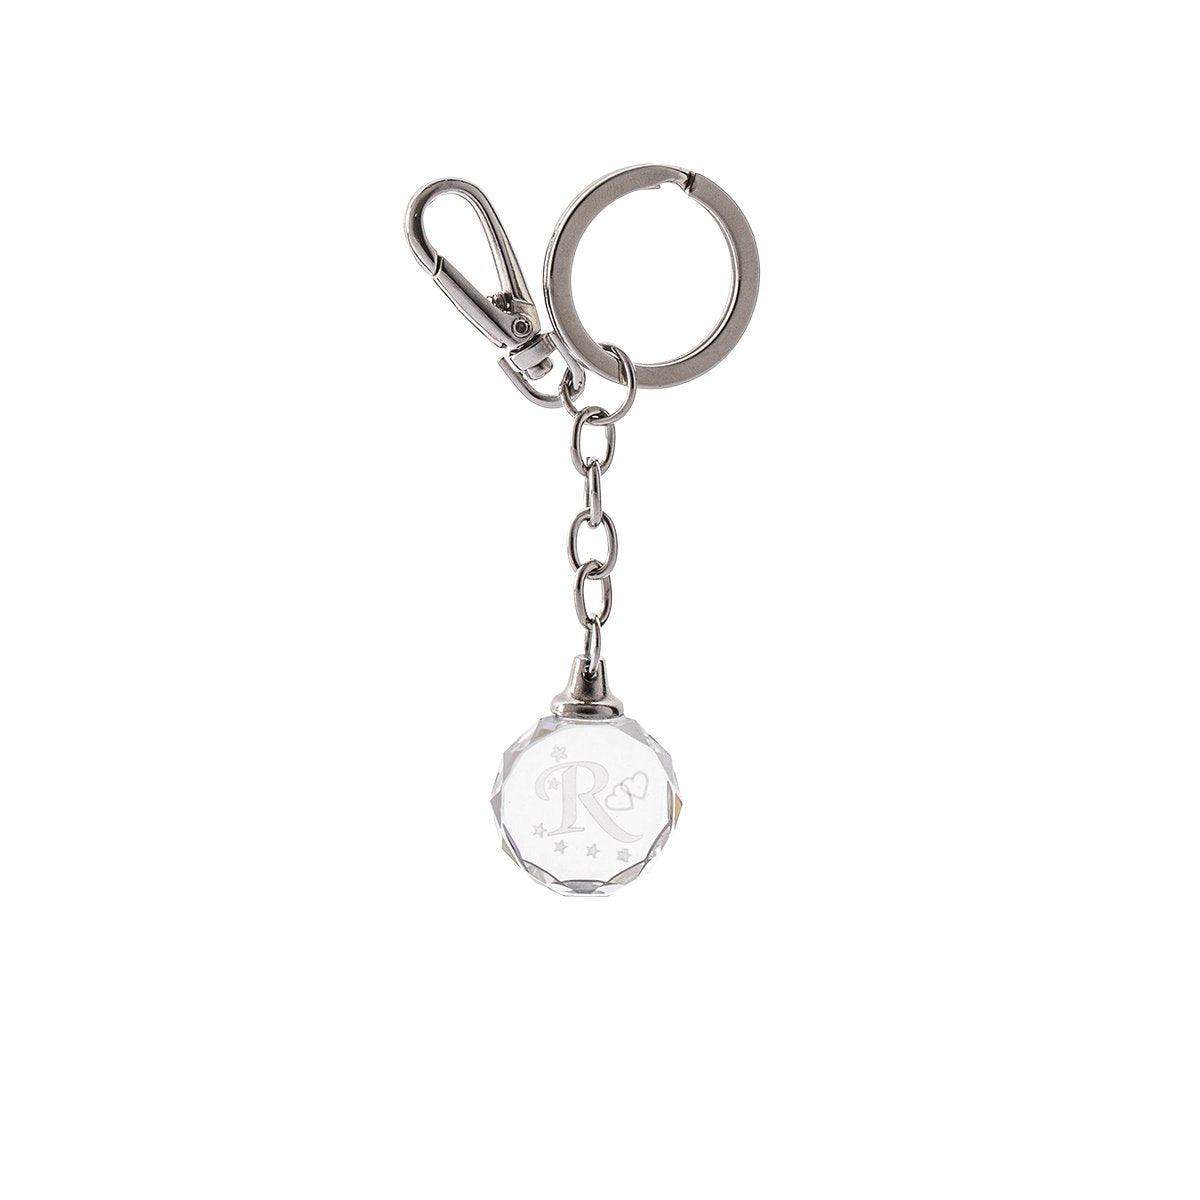 Keychain - Clear - Letter R 